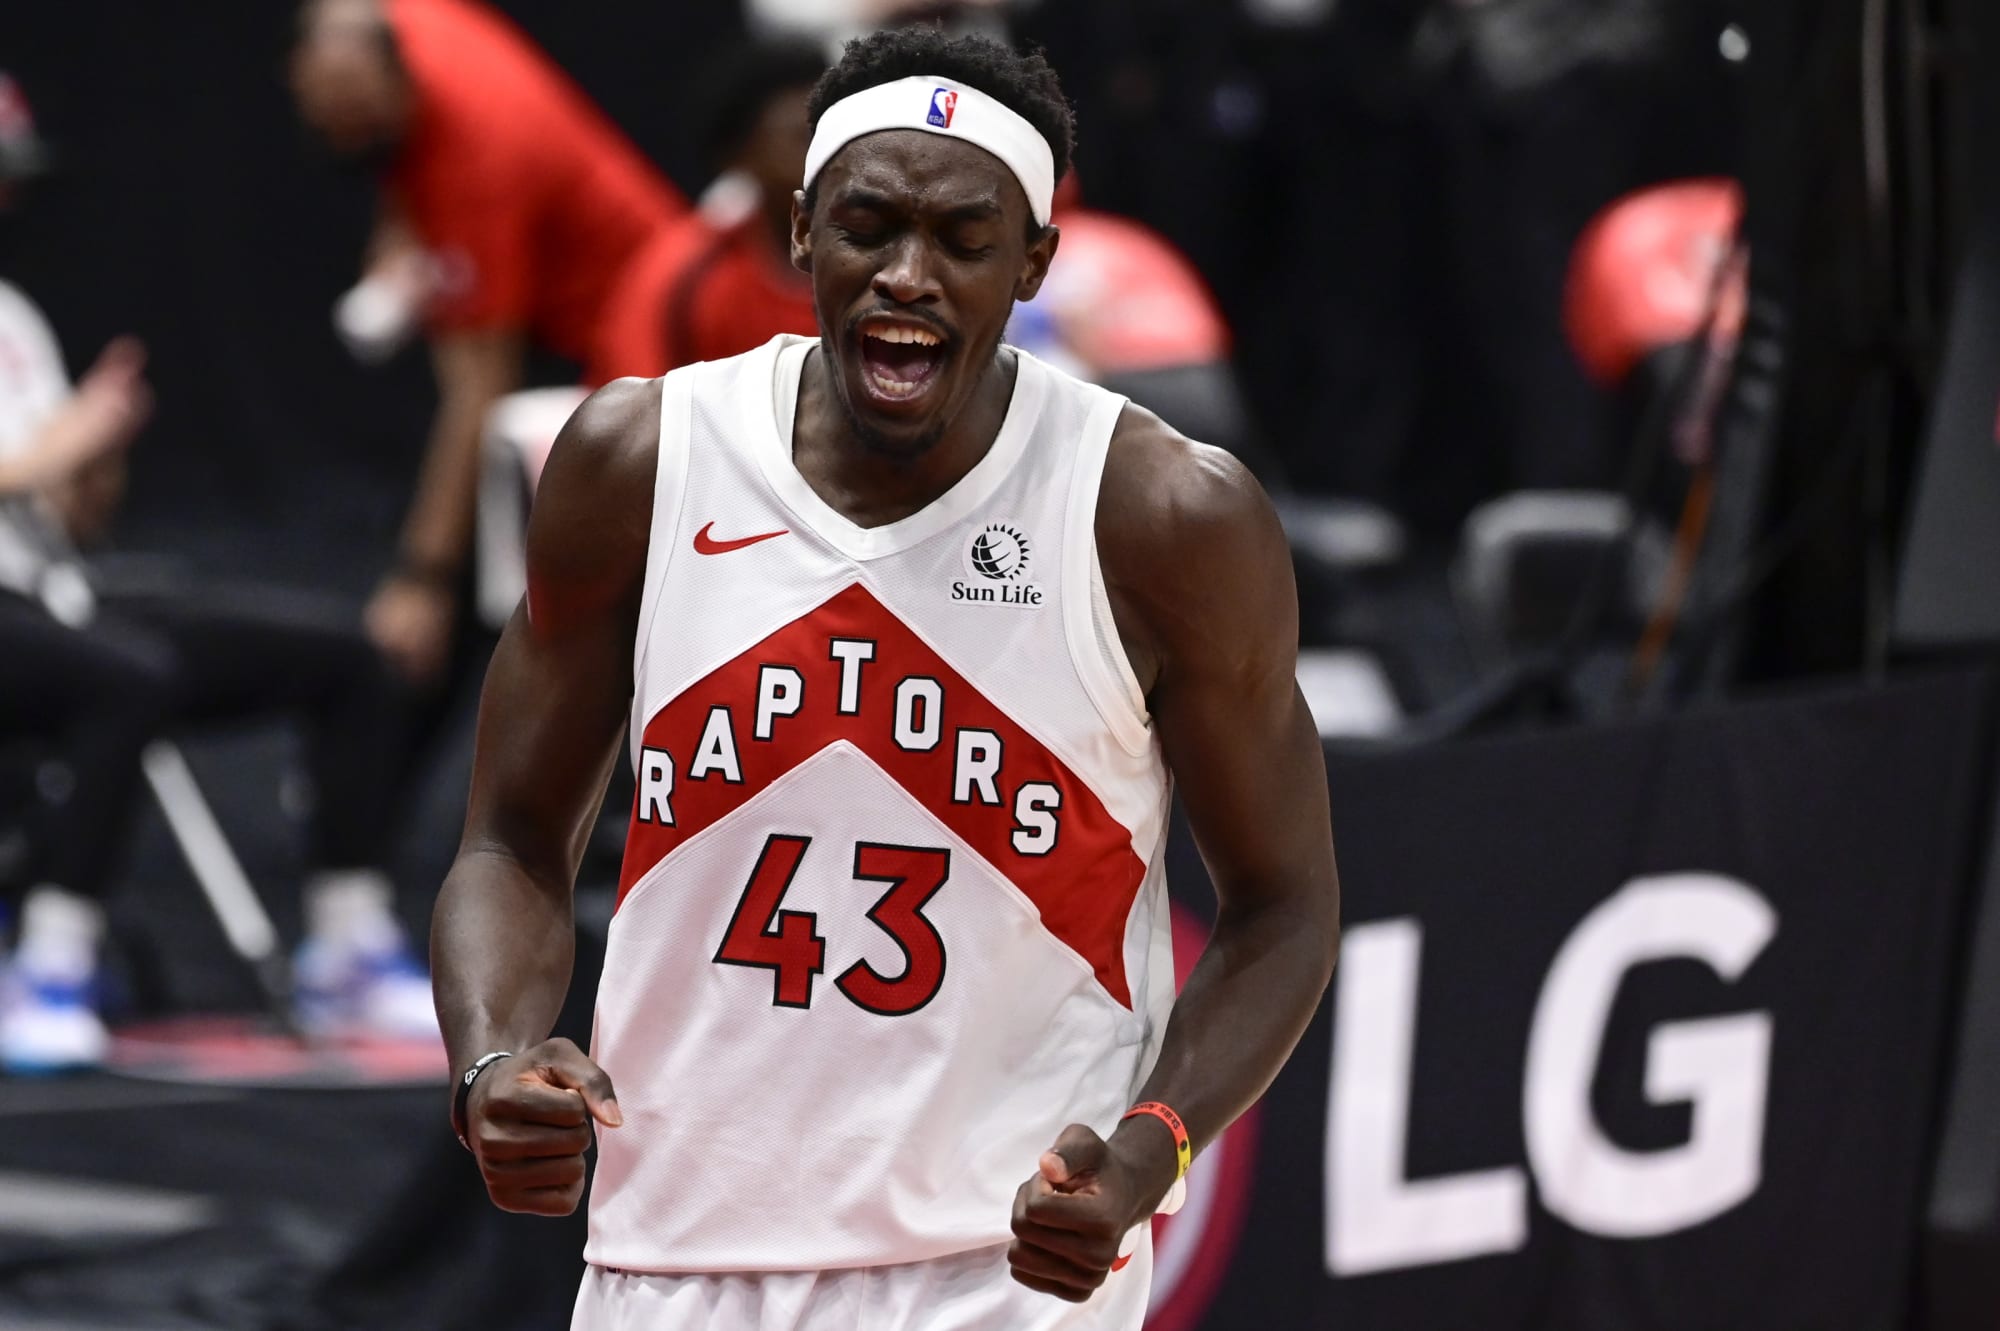 Raptors: Why is Pascal Siakam dominating on offense lately?